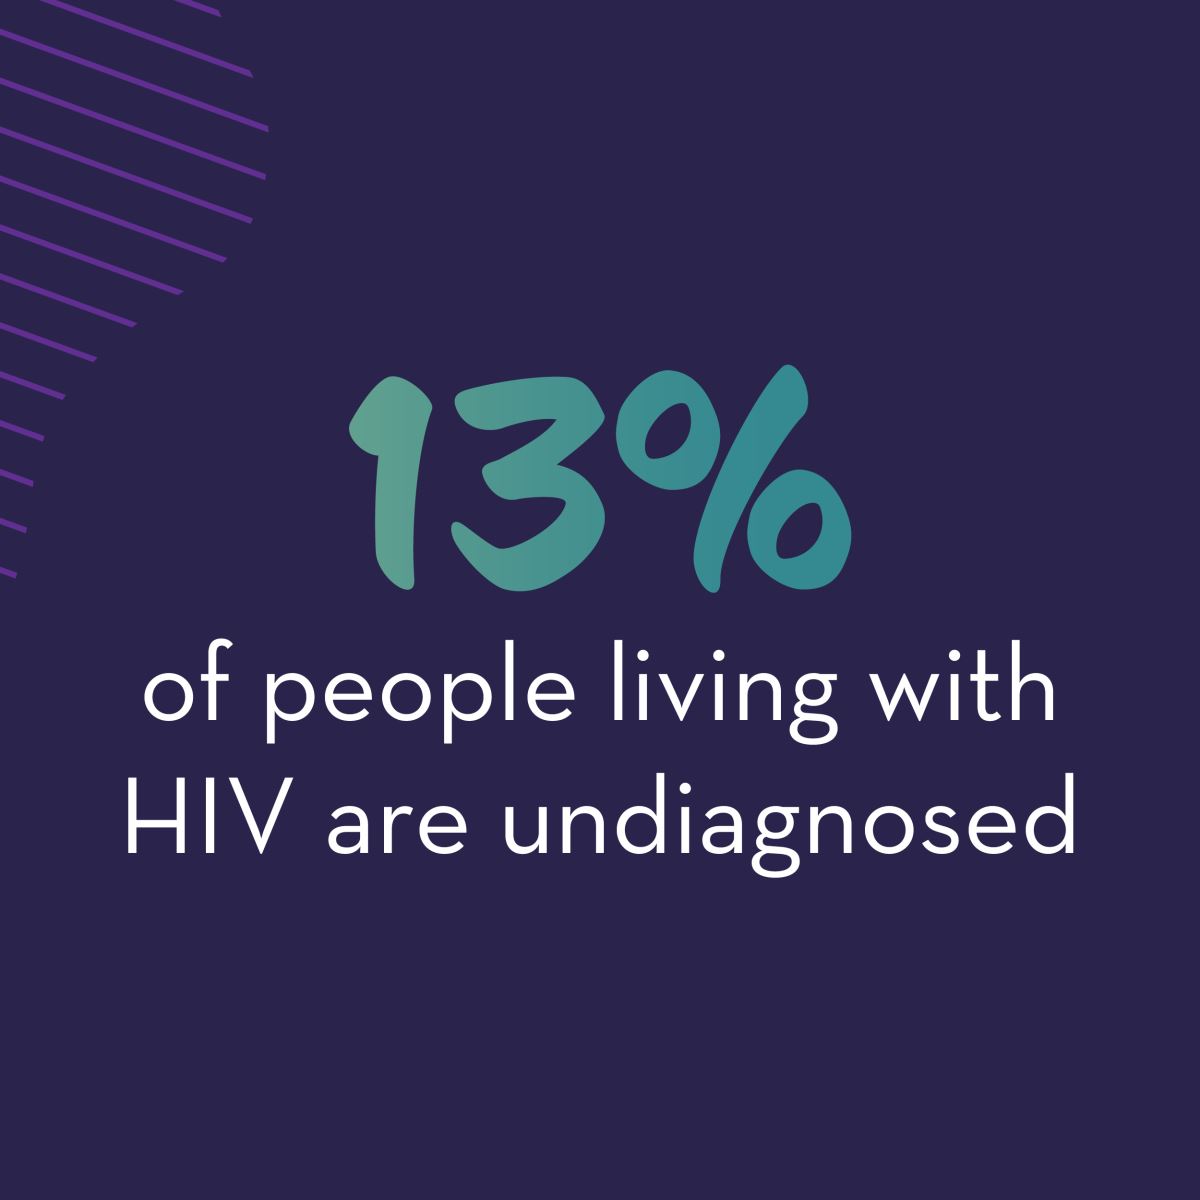 13% of people living with of HIV are undiagnosed